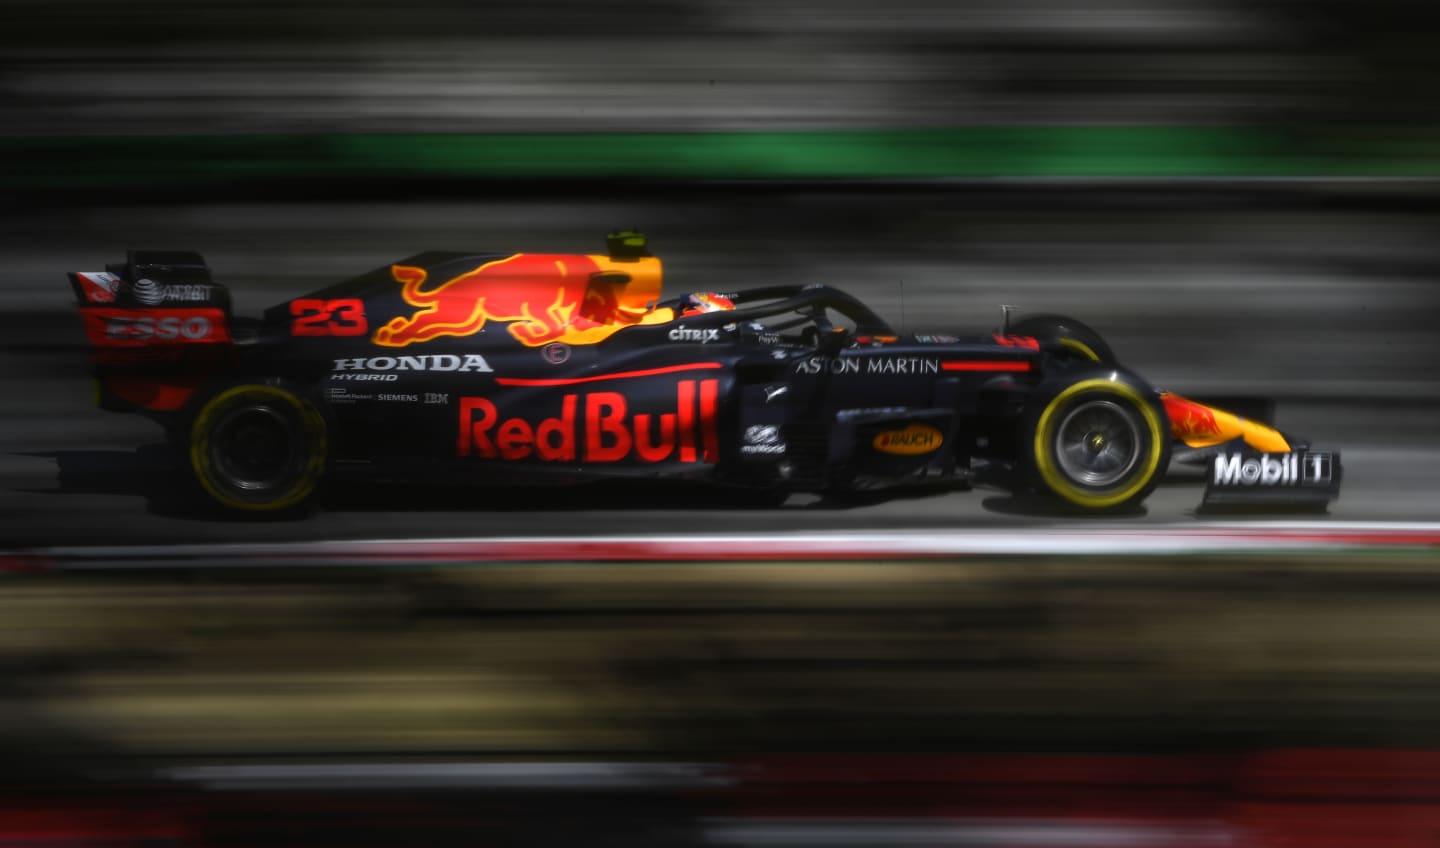 BARCELONA, SPAIN - AUGUST 14: Alexander Albon of Thailand driving the (23) Aston Martin Red Bull Racing RB16 on track during practice for the F1 Grand Prix of Spain at Circuit de Barcelona-Catalunya on August 14, 2020 in Barcelona, Spain. (Photo by Rudy Carezzevoli/Getty Images)